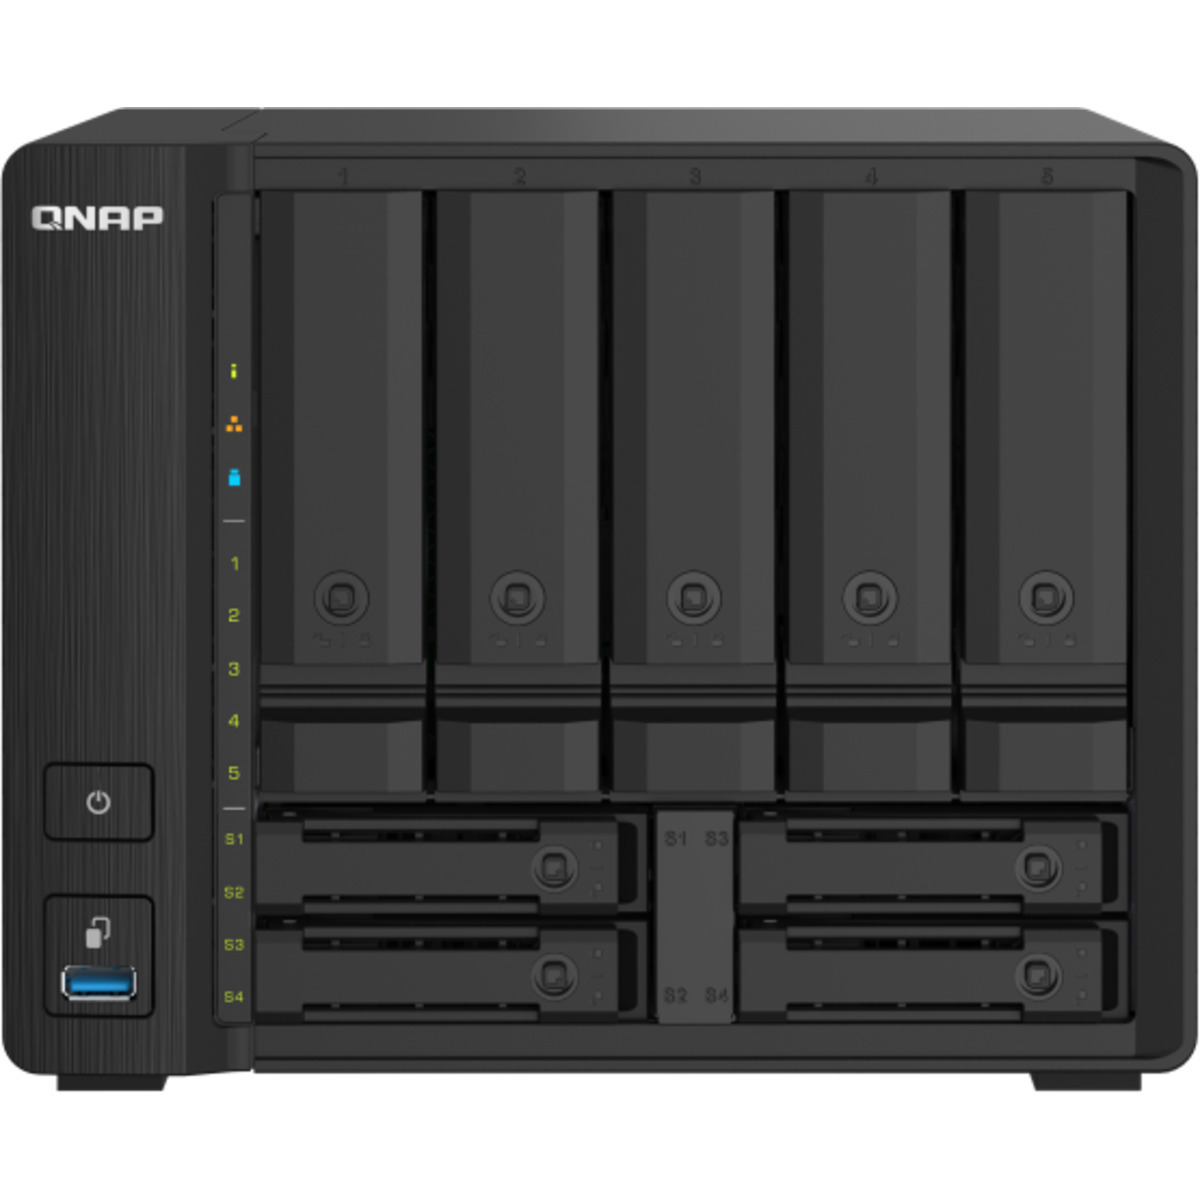 QNAP TS-932PX 12tb 5+4-Bay Desktop Multimedia / Power User / Business NAS - Network Attached Storage Device 3x4tb Crucial MX500 CT4000MX500SSD1 2.5 560/510MB/s SATA 6Gb/s SSD CONSUMER Class Drives Installed - Burn-In Tested - FREE RAM UPGRADE TS-932PX